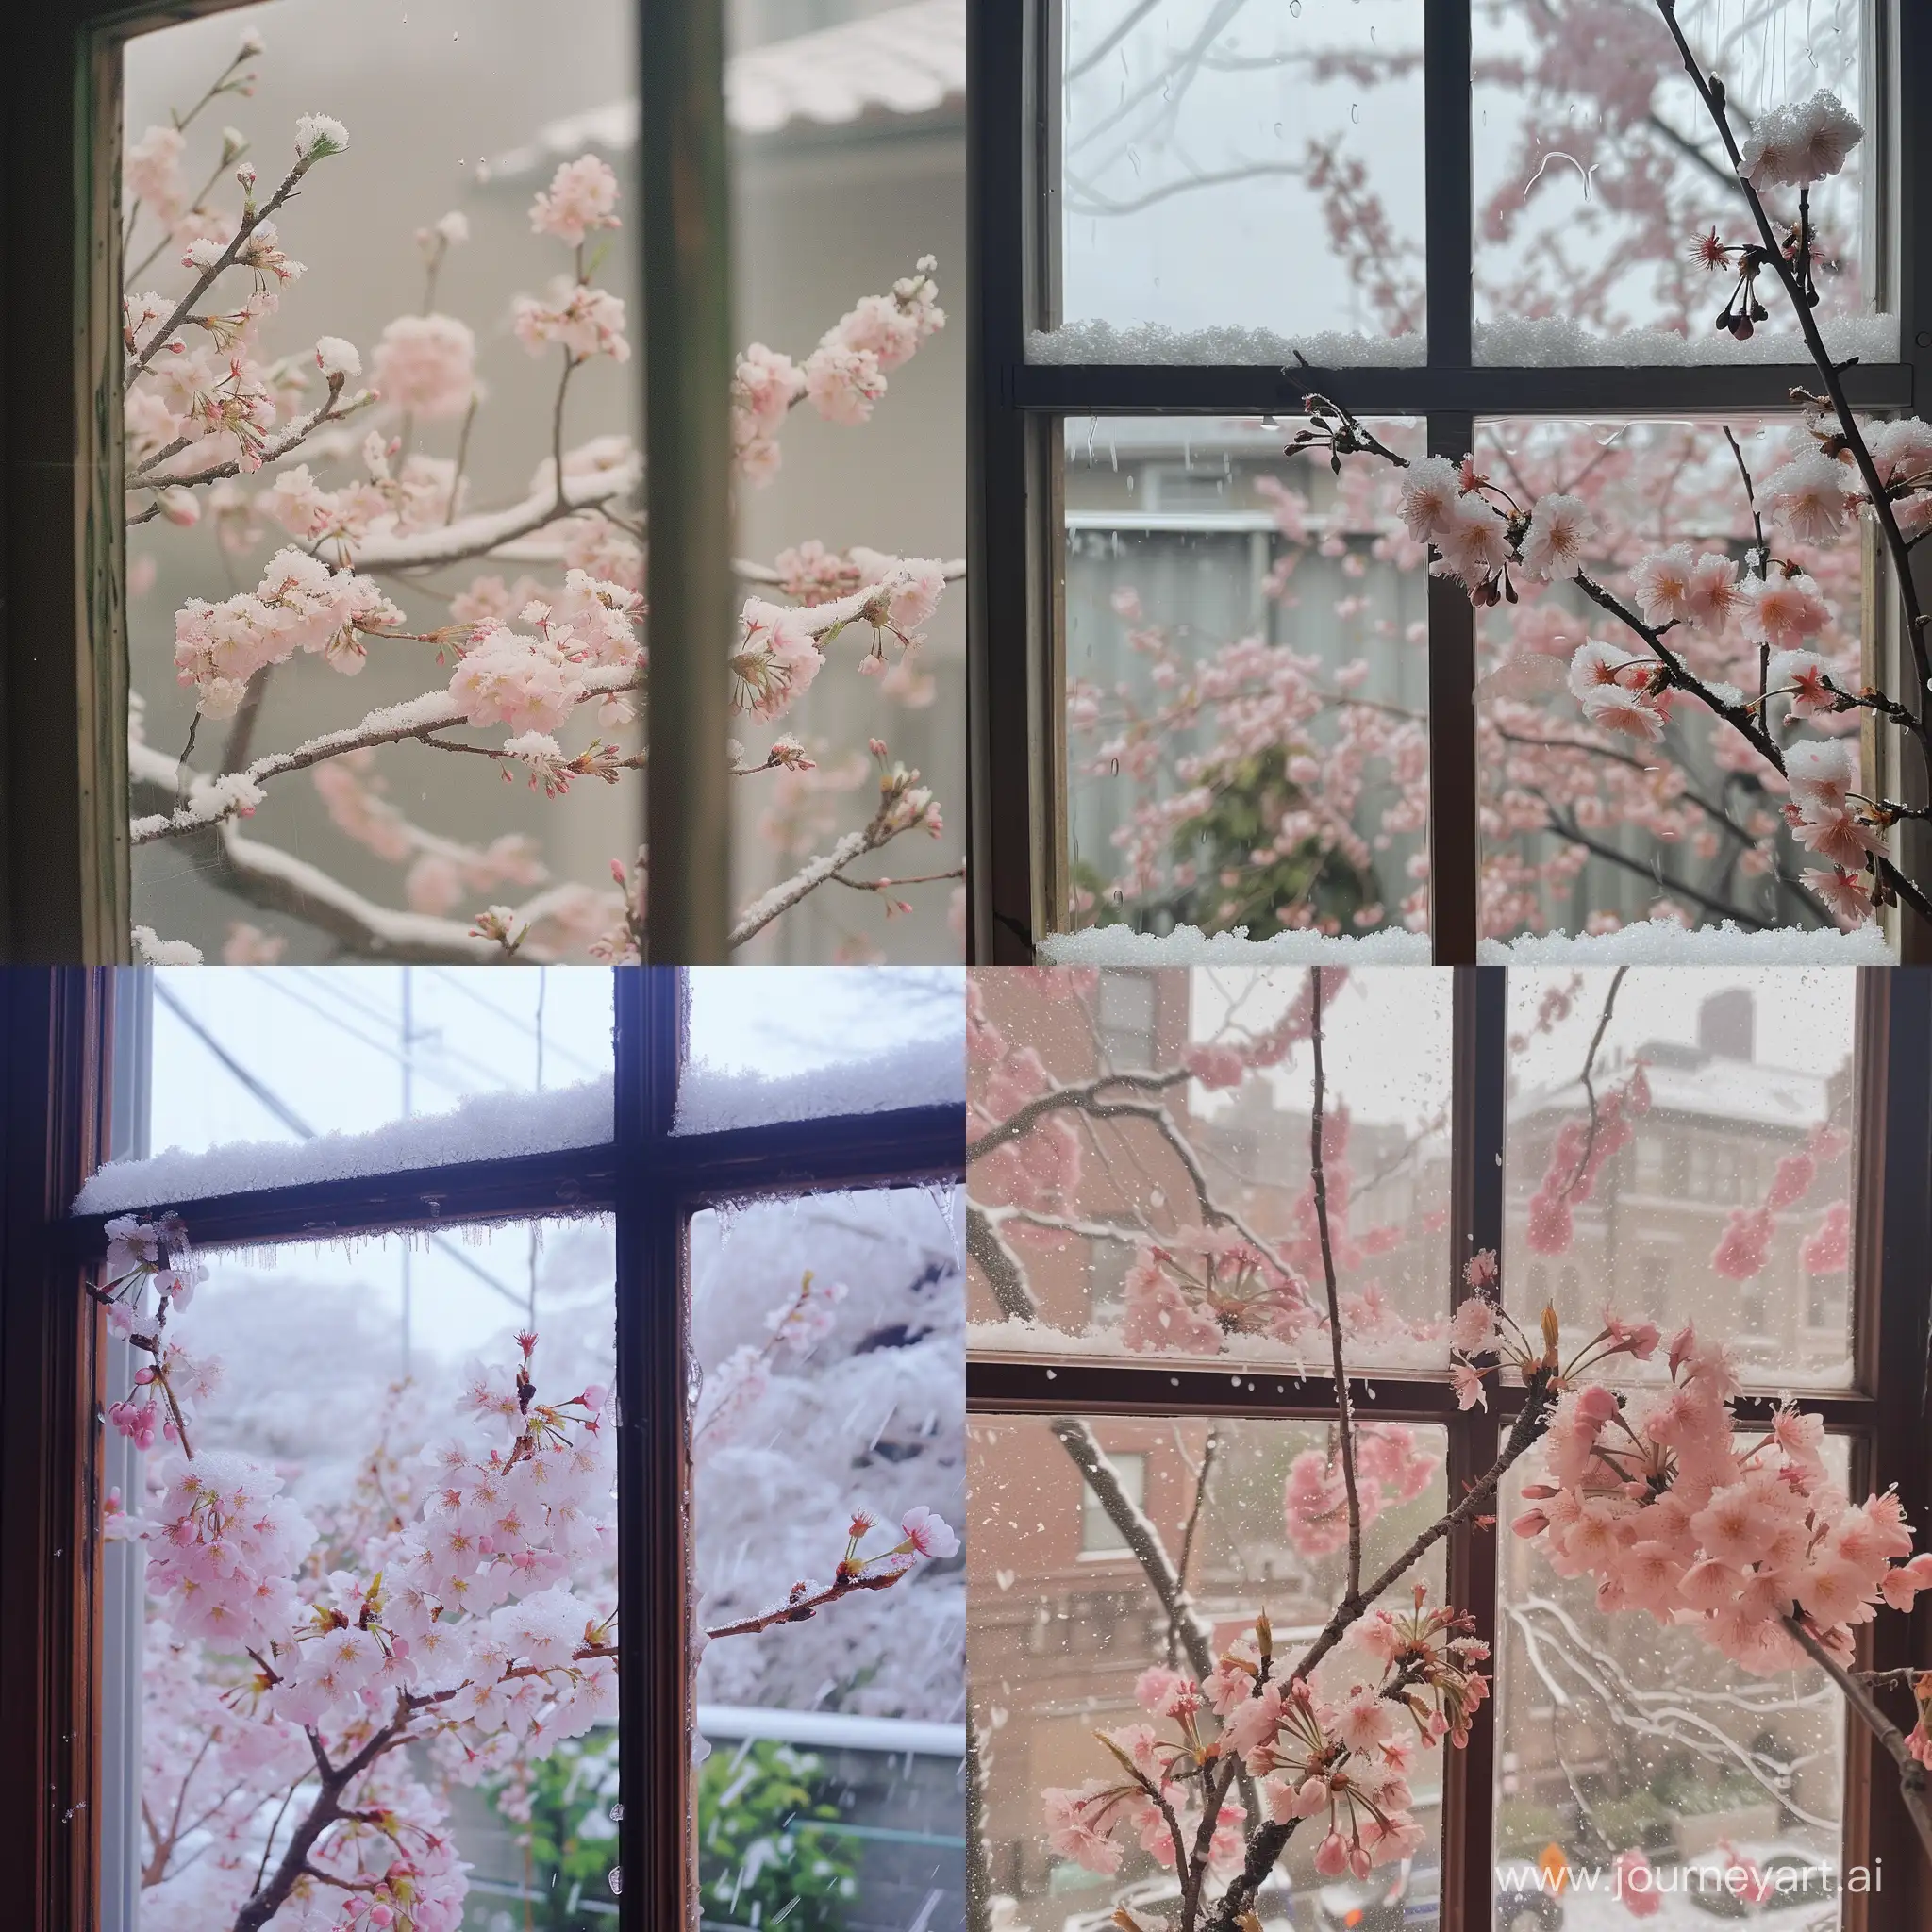 Captivating-Contrast-First-Snow-Over-EverBlooming-Cherry-Blossoms